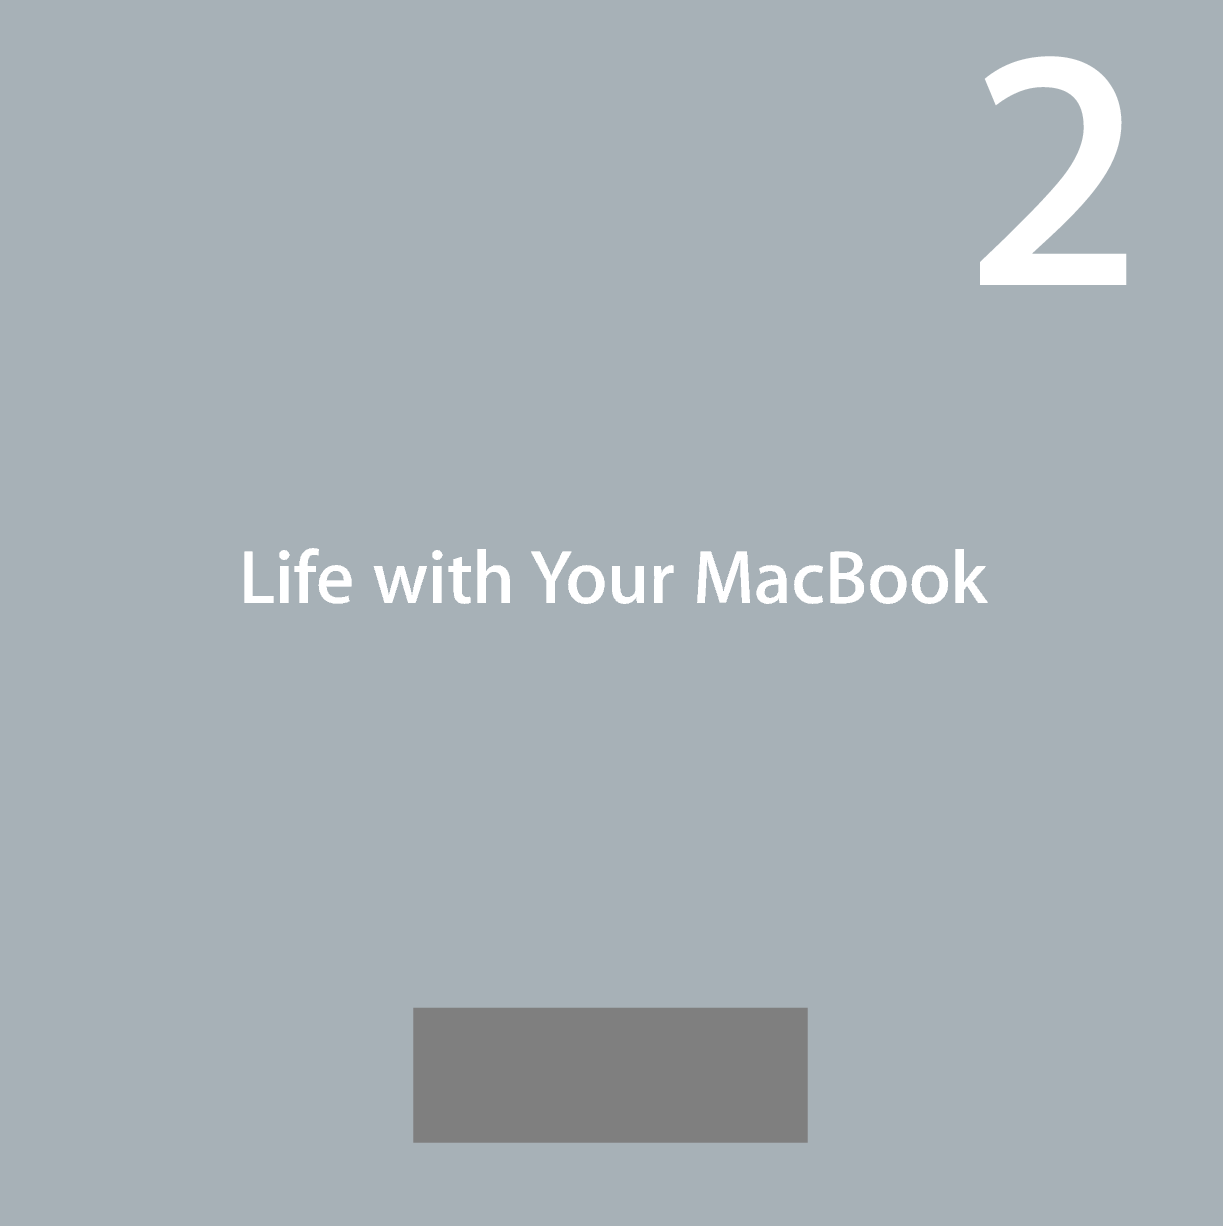  2 2  Life with Your MacBook